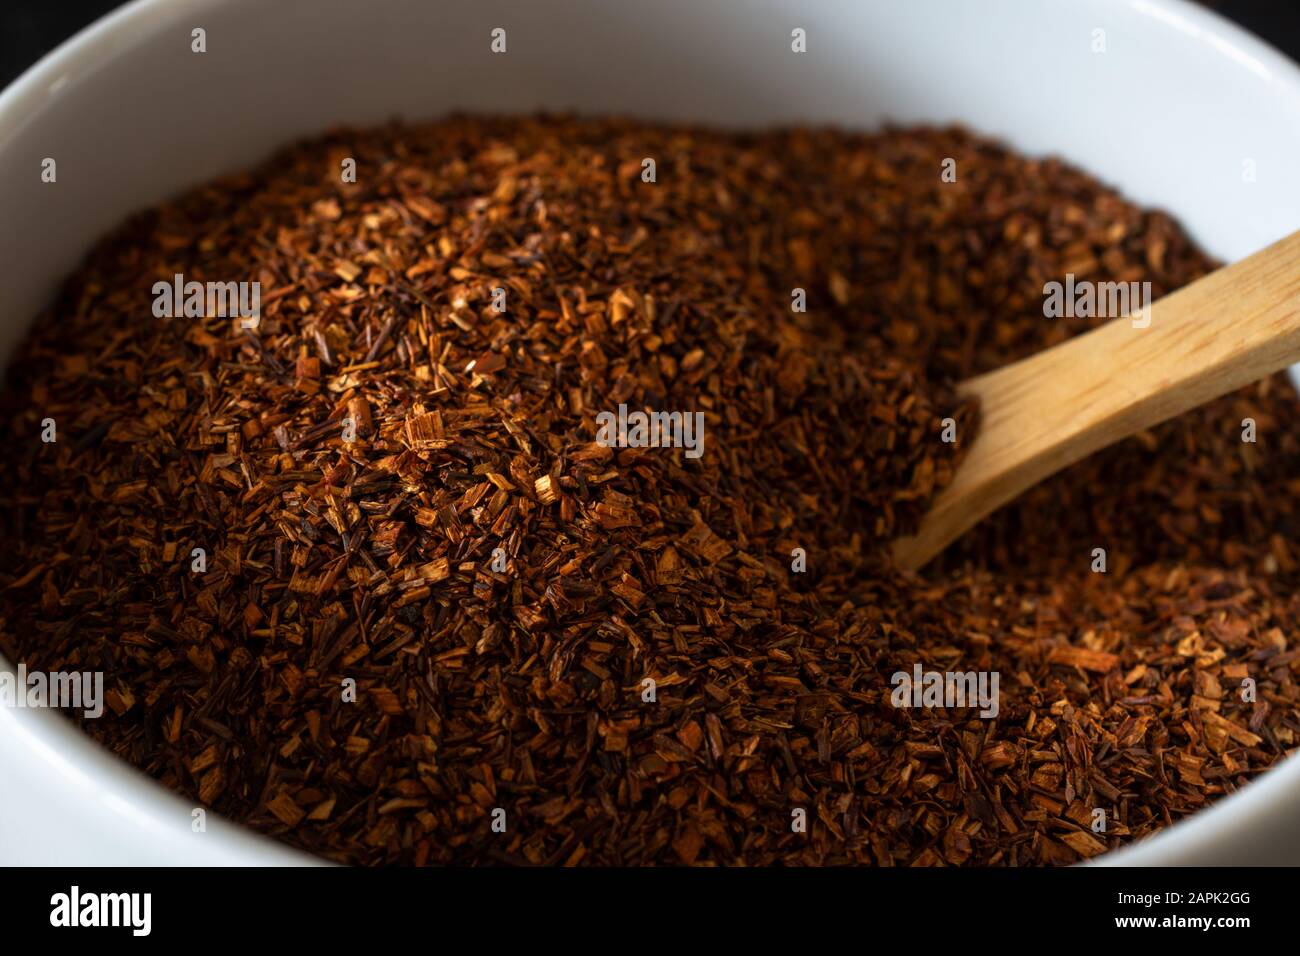 Close up shot of dried Rooibos (Redbush) tea leaves in a white ceramic bowl with wooden spoon. Stock Photo